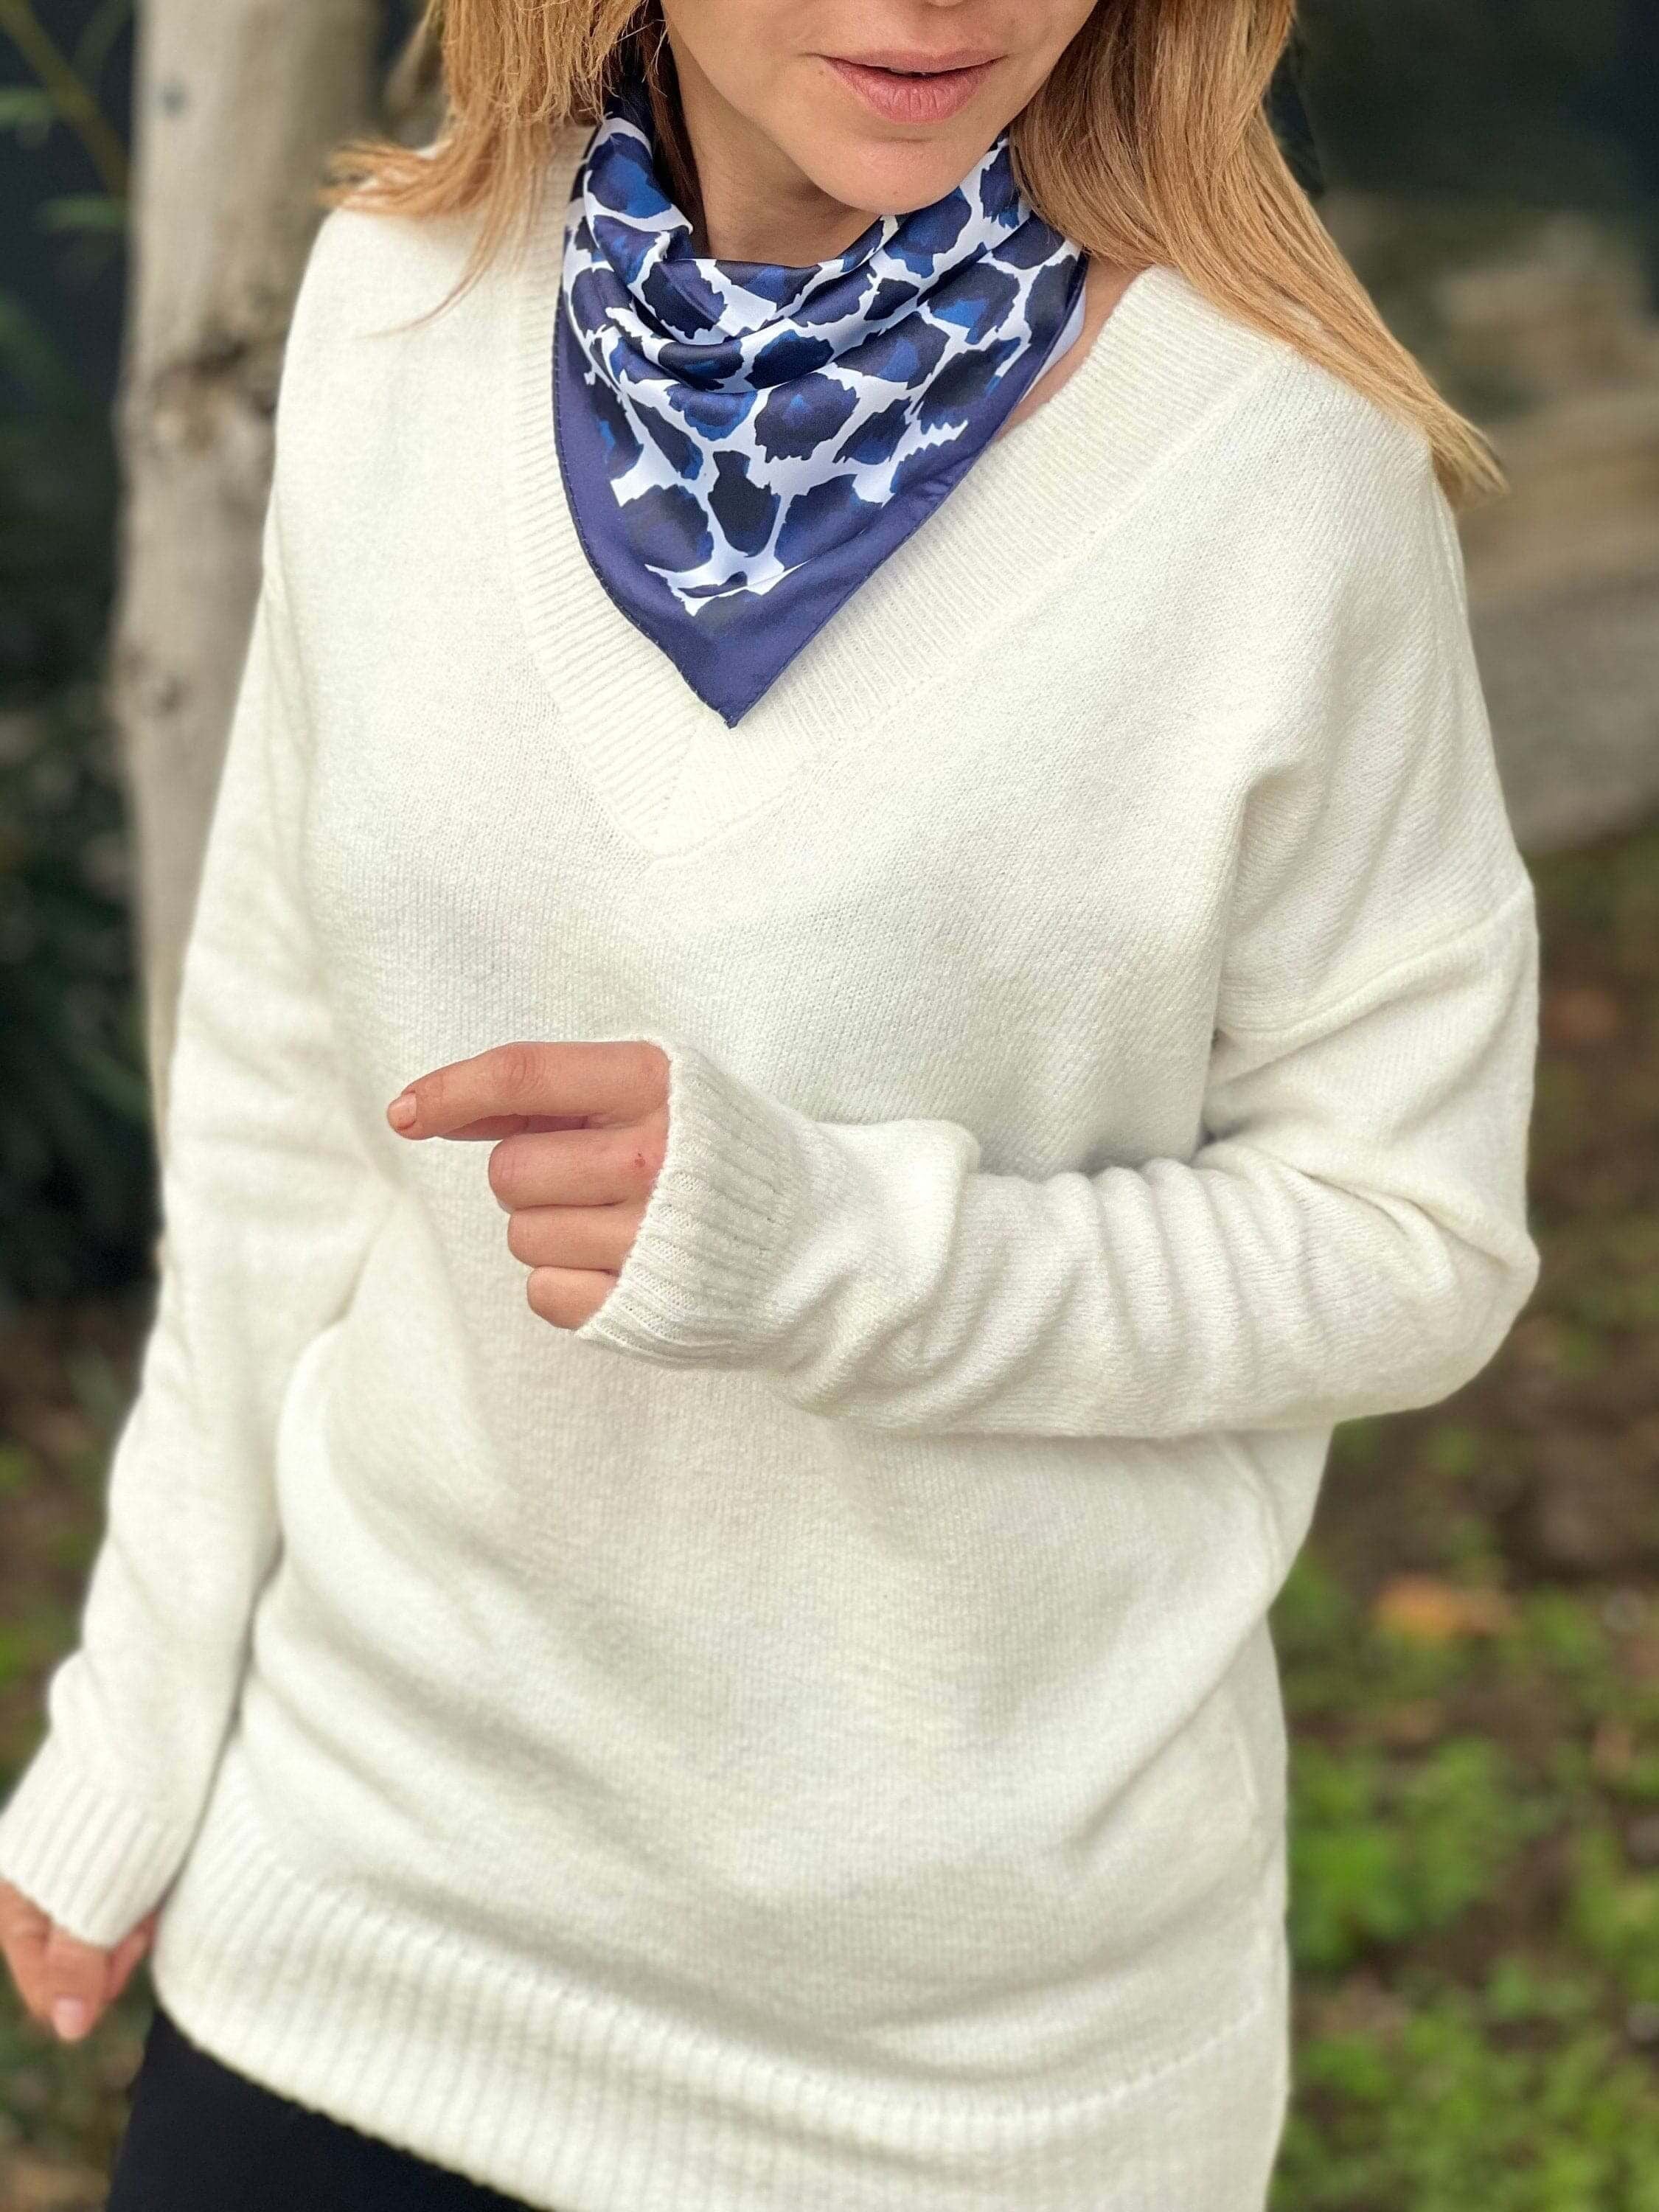 Treat her to a versatile and stylish accessory with this 100% satin scarf, perfect for wearing as a head or neck scarf.